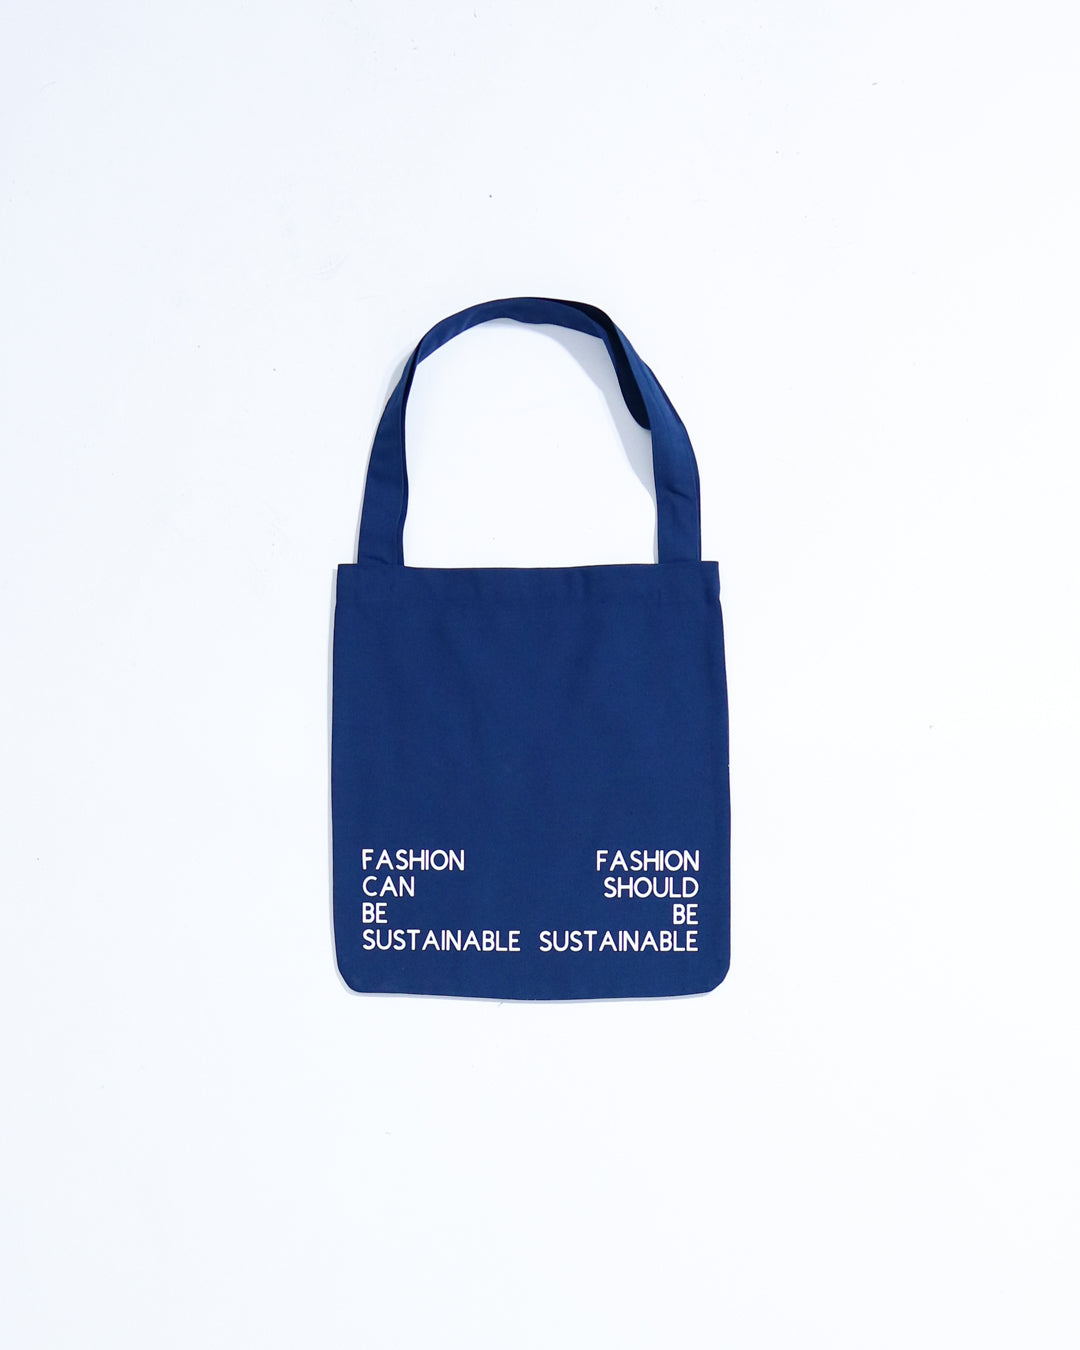 Sustainable Fashion Tote - Navy Blue